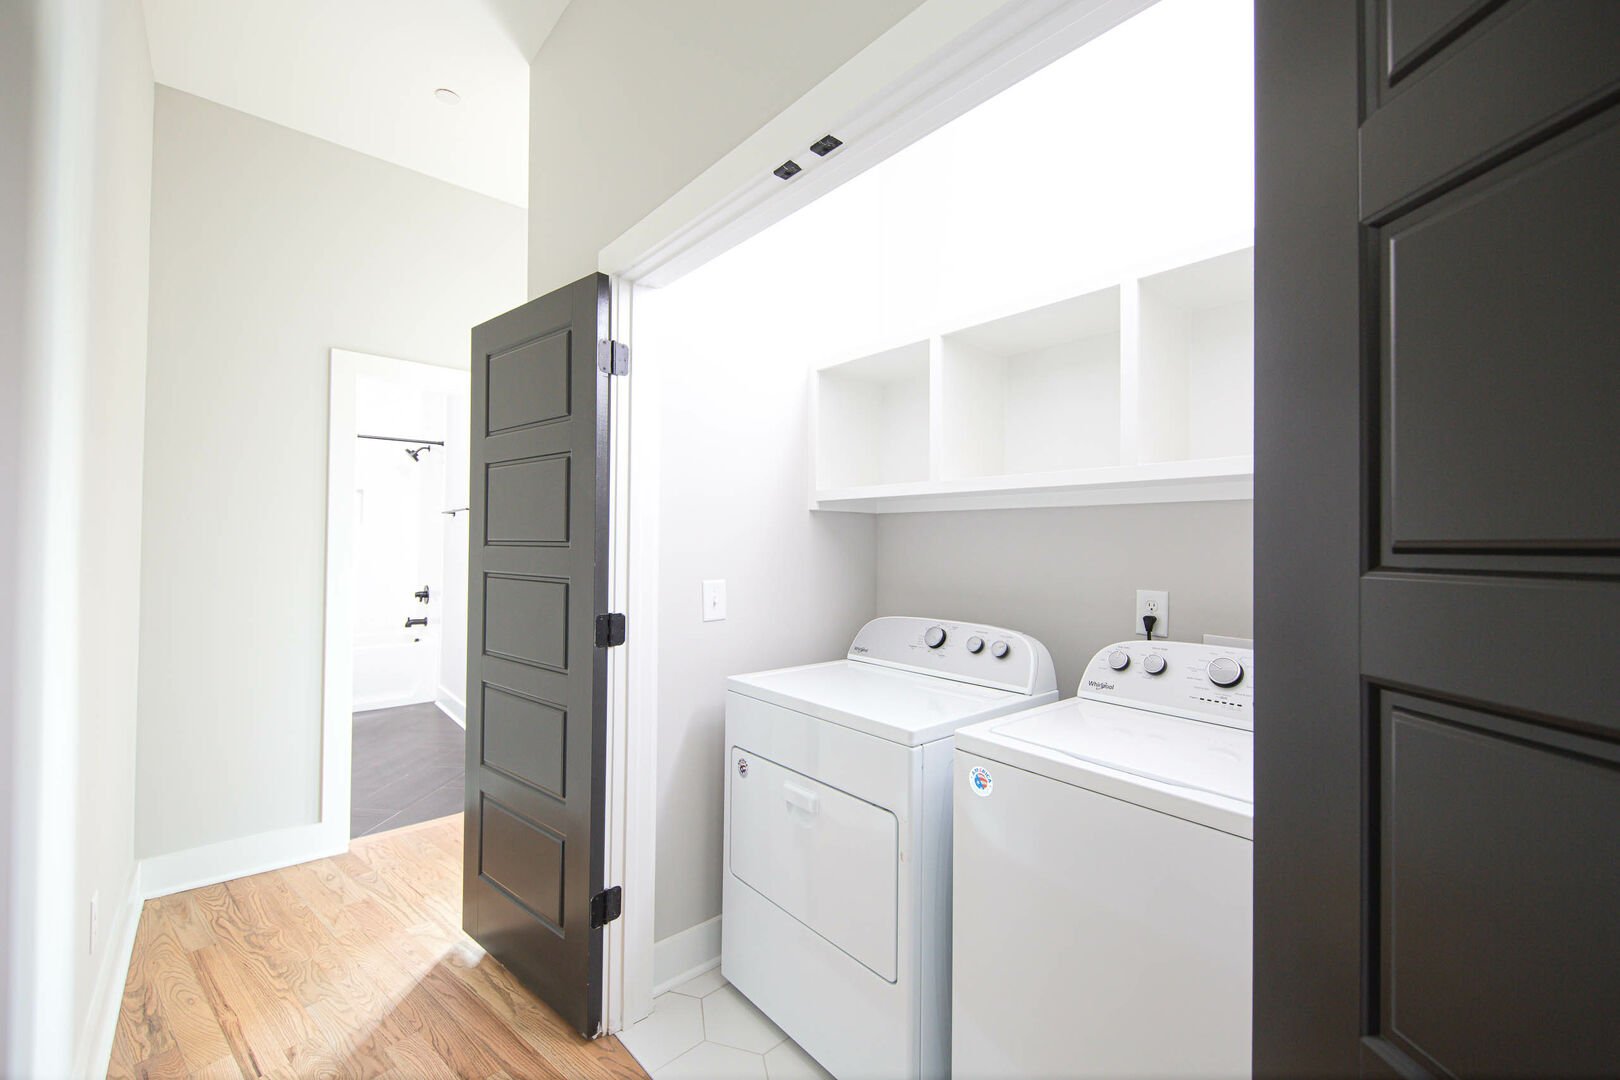 1st unit, 3rd floor: Complimentary washer and dryer